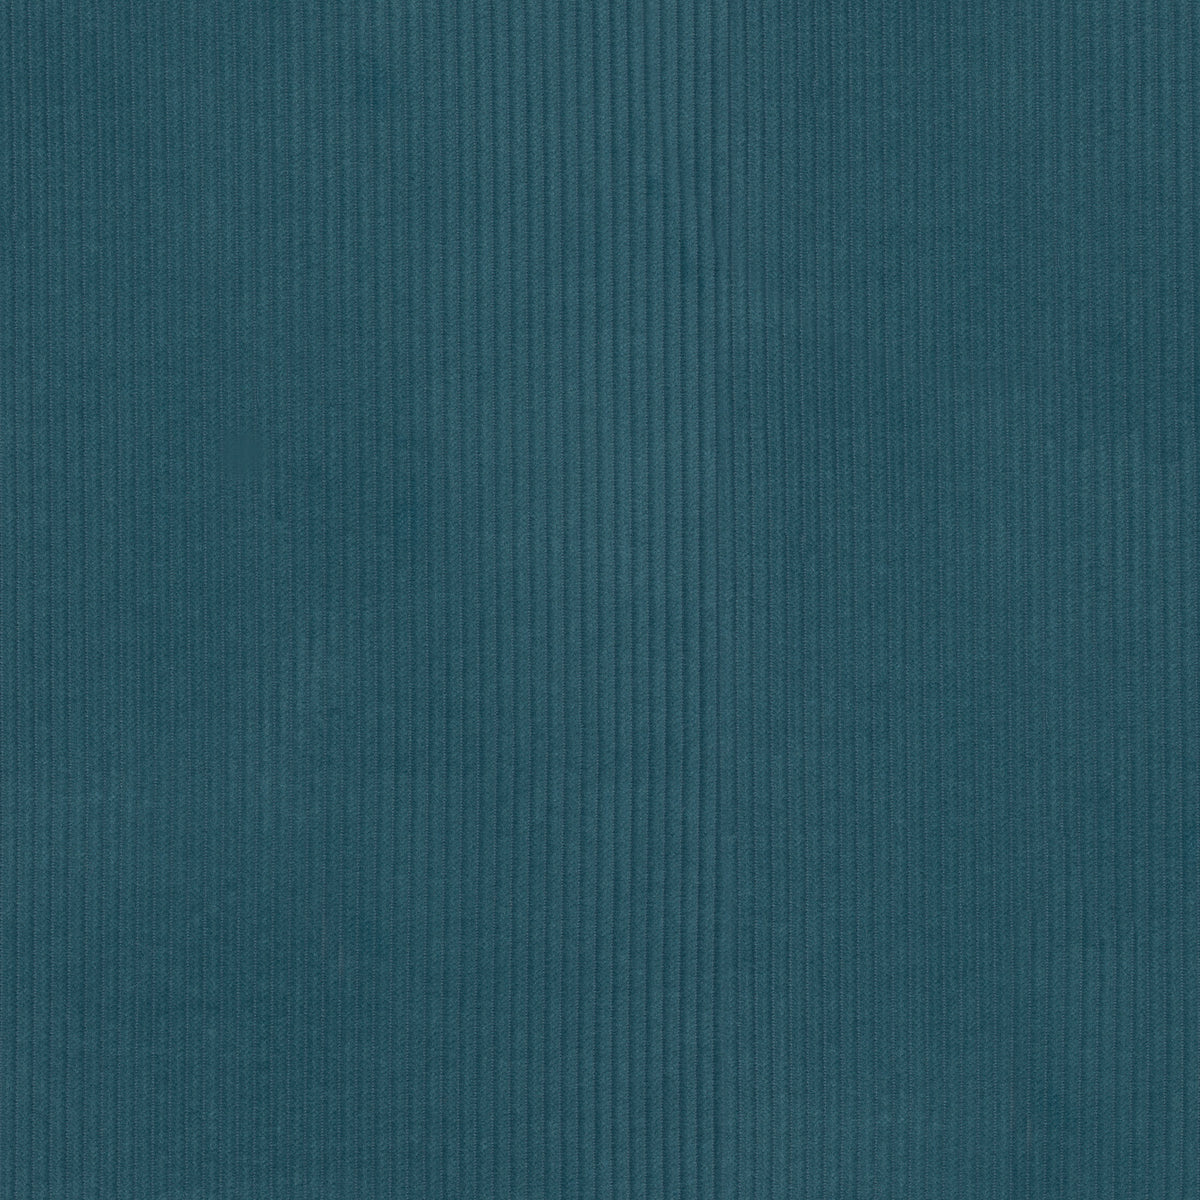 P/K Lifestyles Wales - Delft 412025 Upholstery Fabric